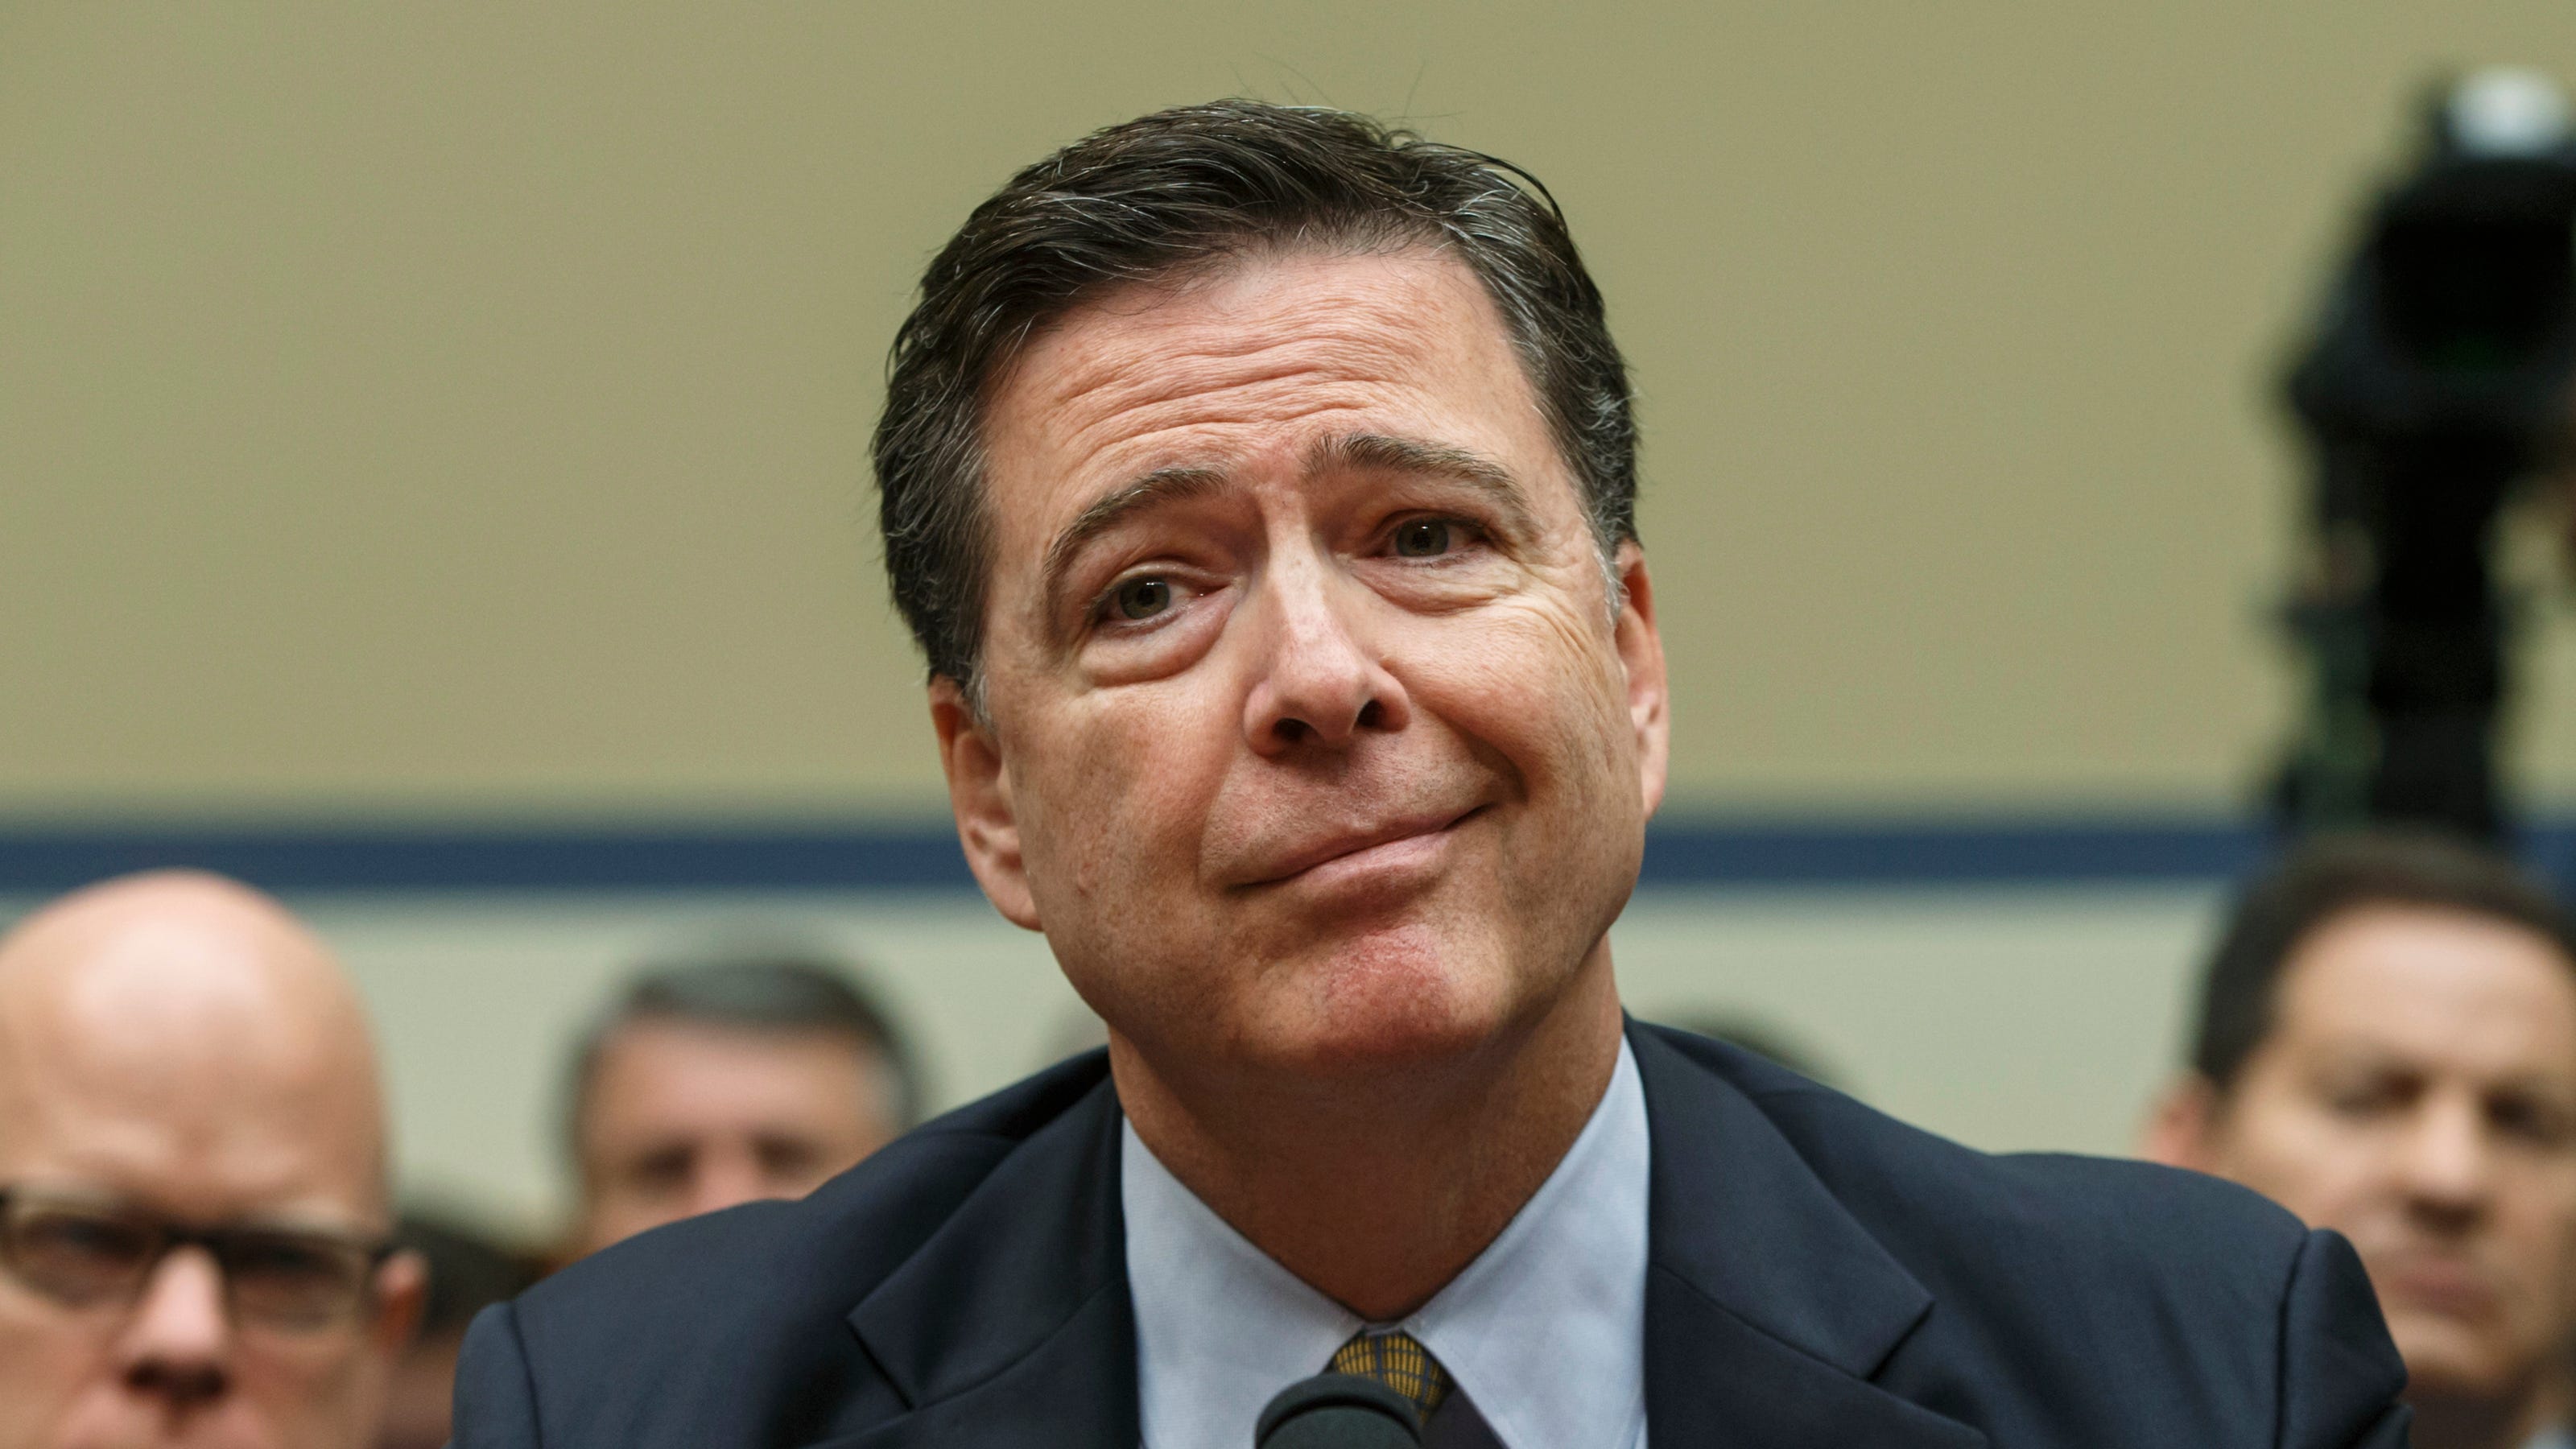 James Comey: The corrupt cop the media painted as their savior